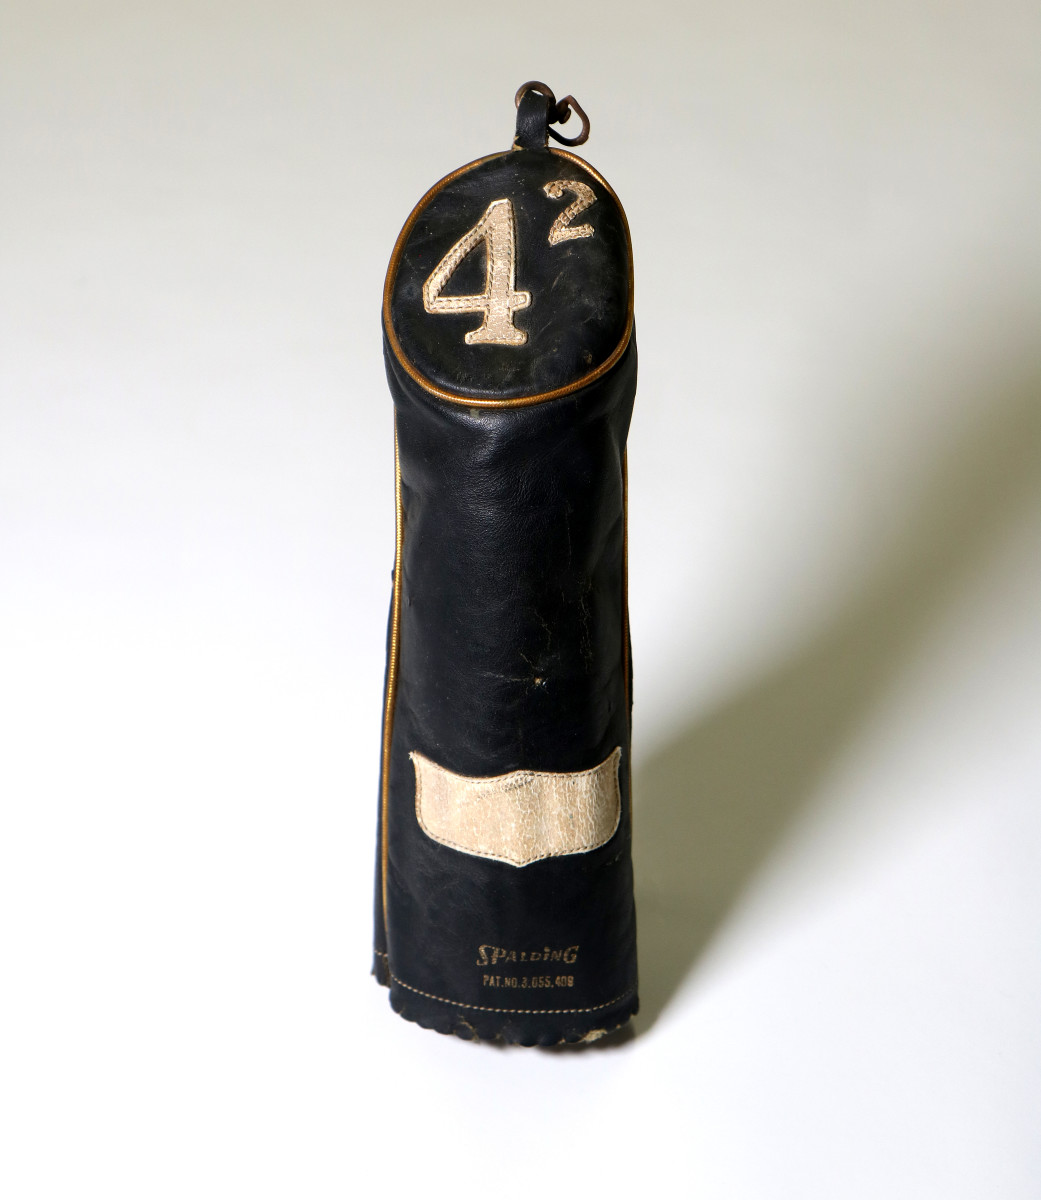 A headcover from Jackie Robinson, with his number 42.